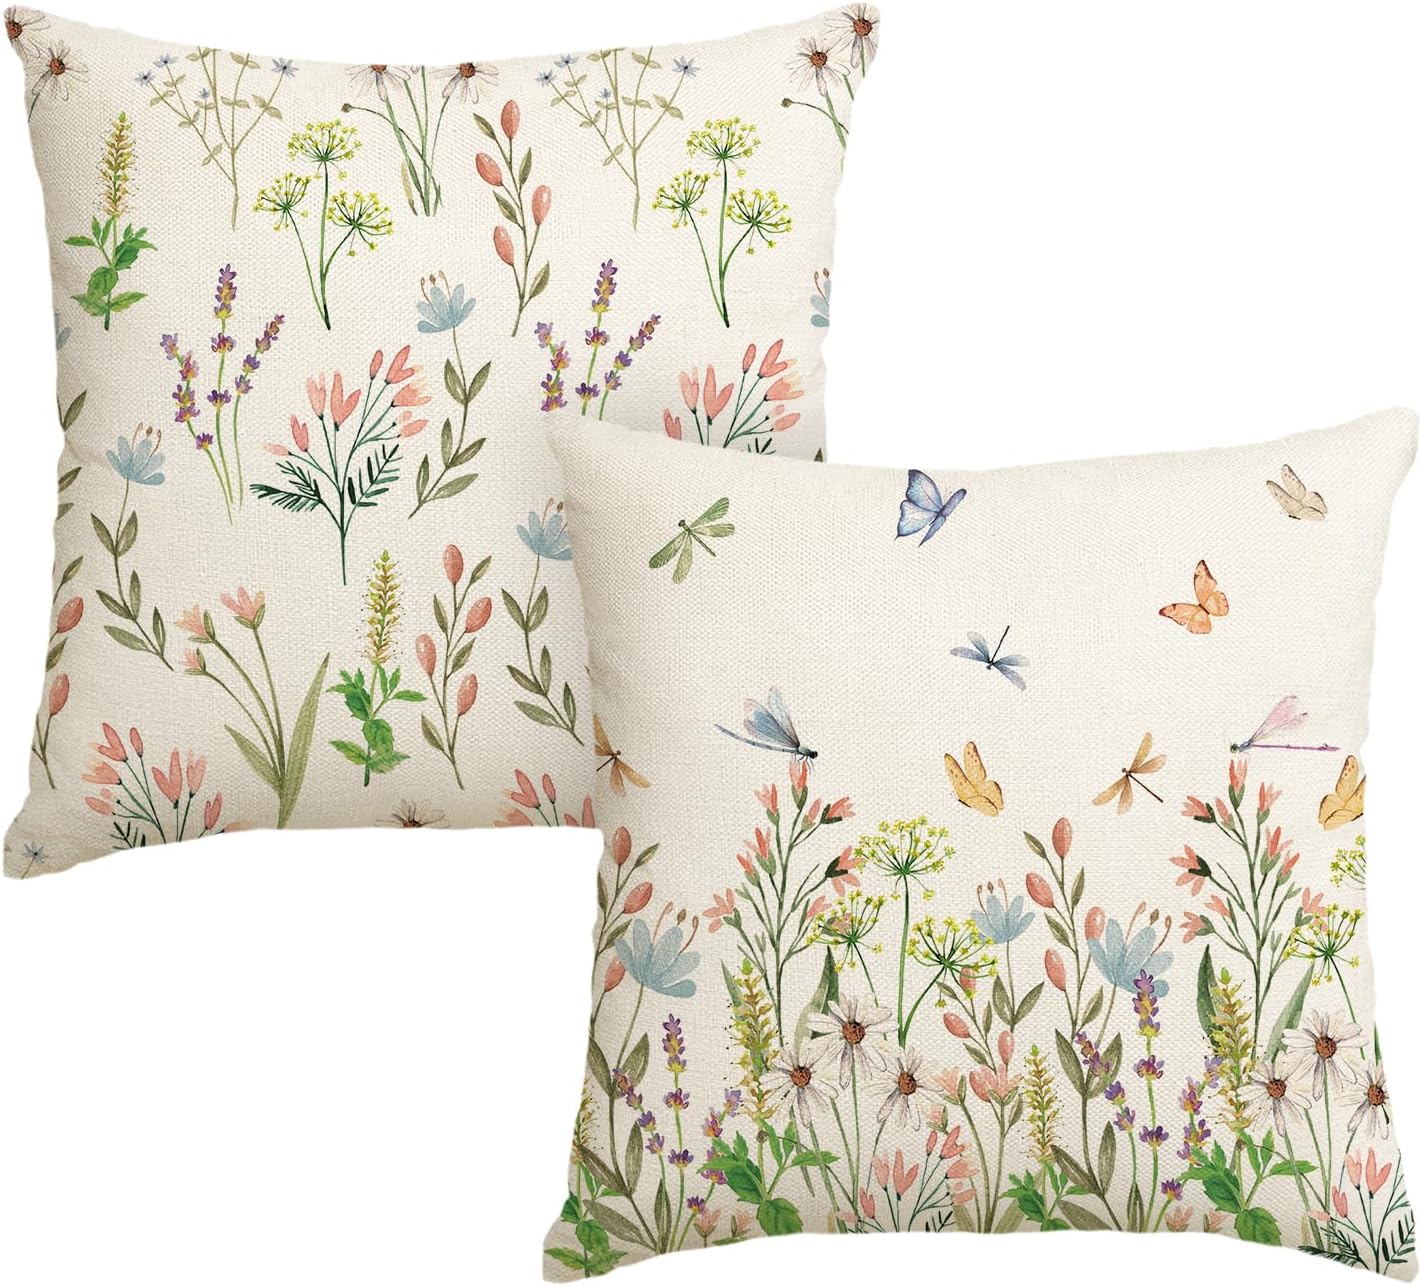 18x18 Spring Wildflowers Throw Pillow Covers Set of 2